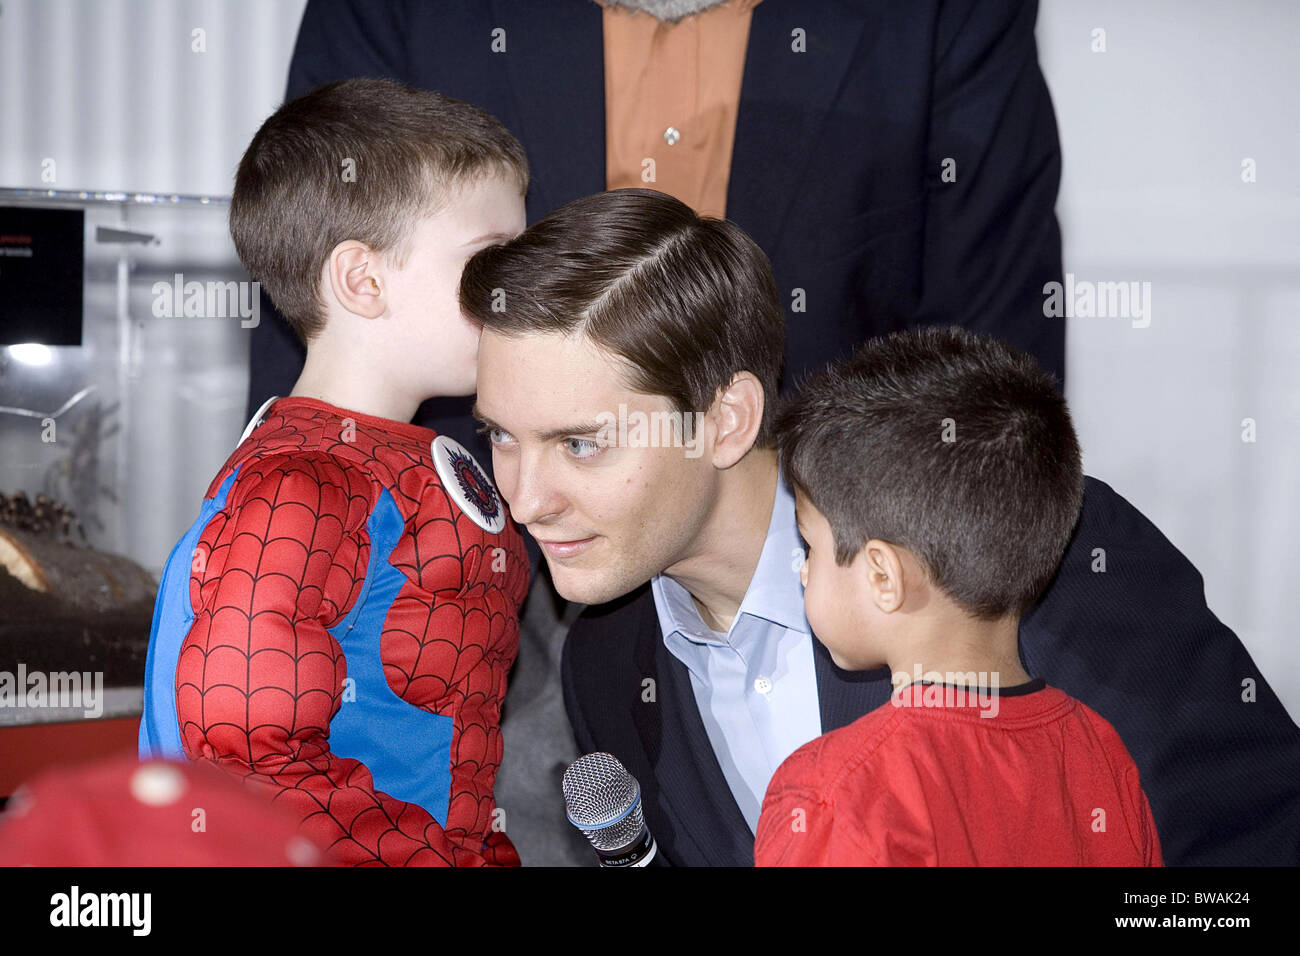 Kids Visit Tobey Maguire at Exhibit of Live Spiders for SPIDER-MAN WEEK Stock Photo